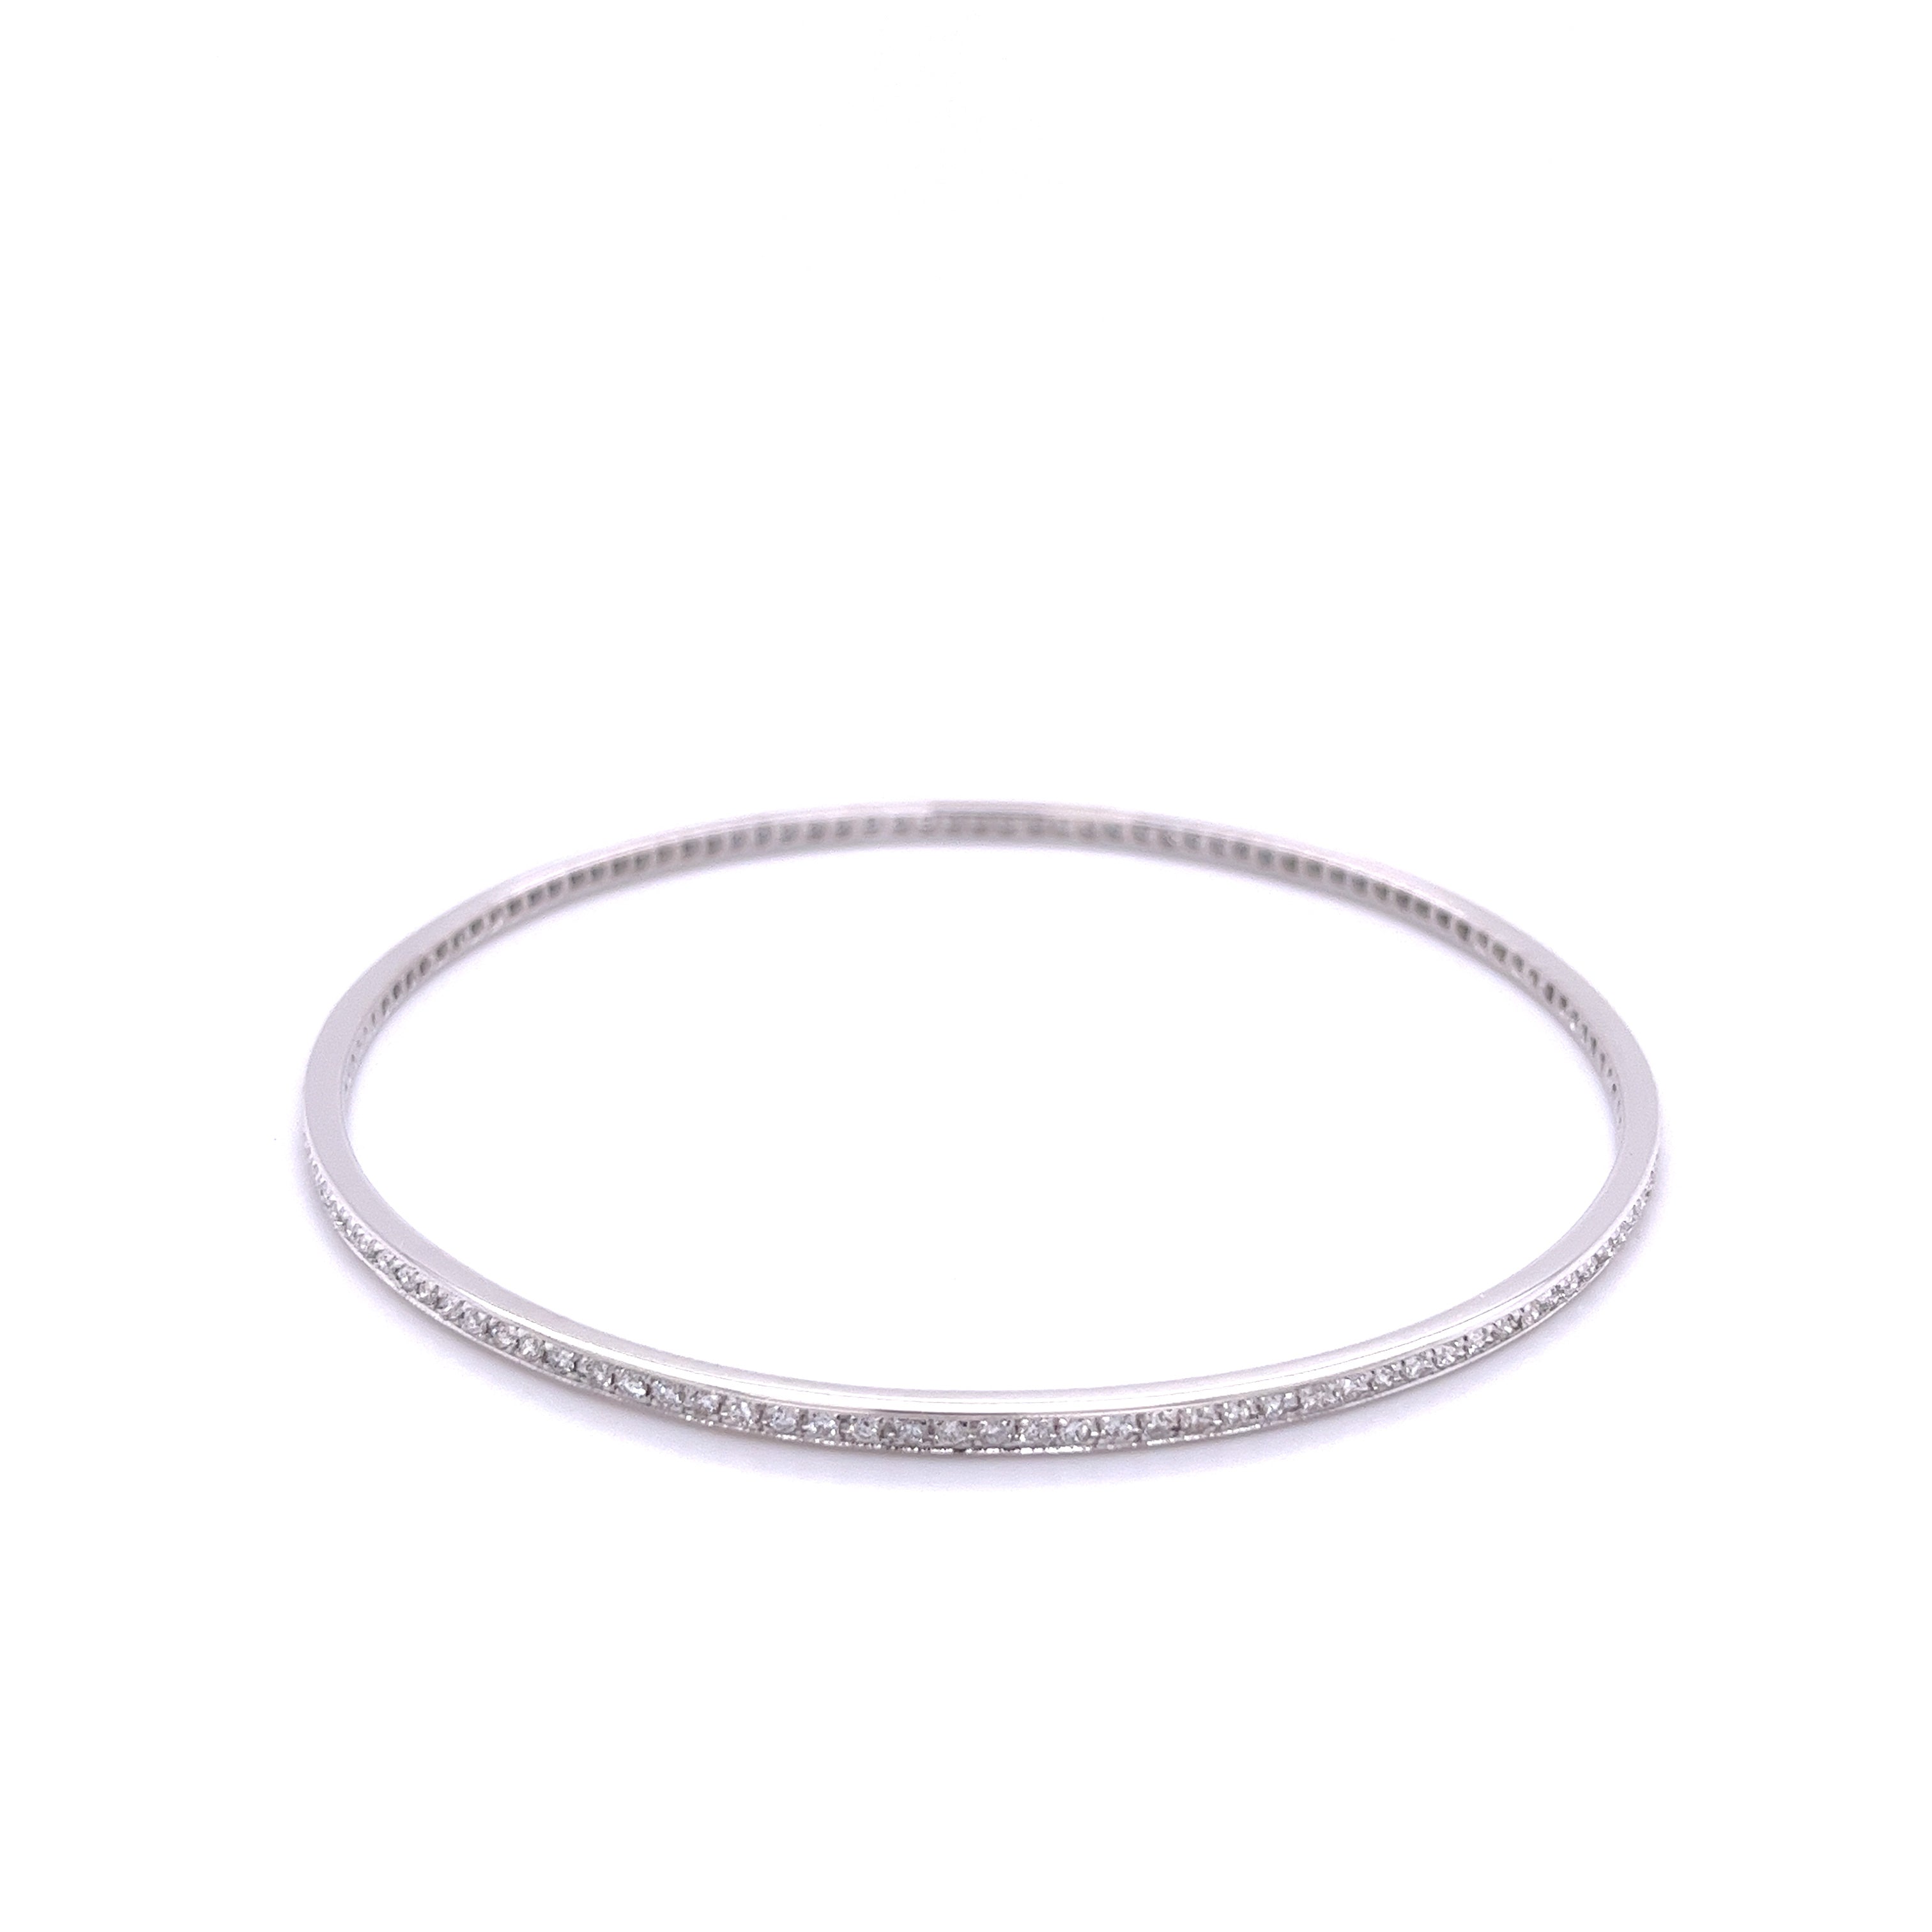 Modern style jewelry example of a simple diamond bangle